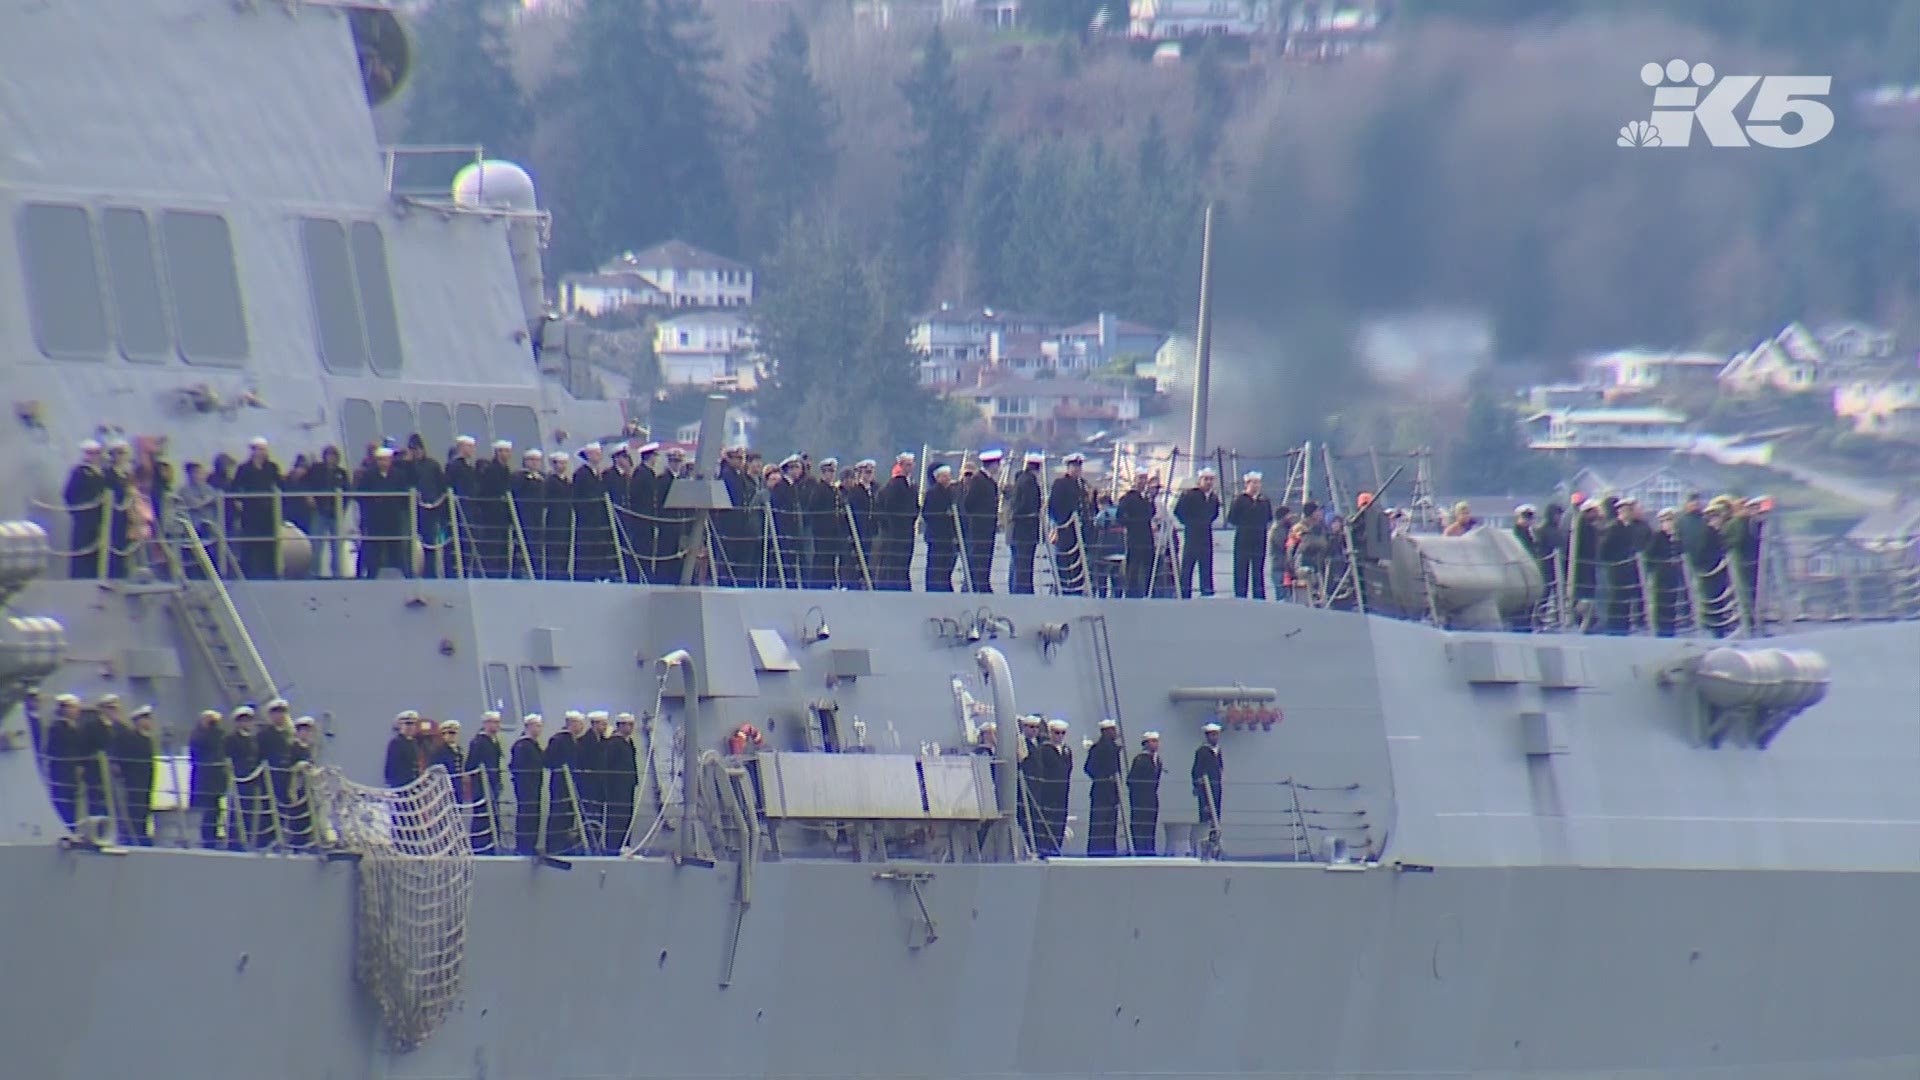 Arleigh Burke-class guided-missile destroyer USS Gridley returned to Naval Station Everett Jan. 21 following a deployment that covered around 39,000 nautical miles